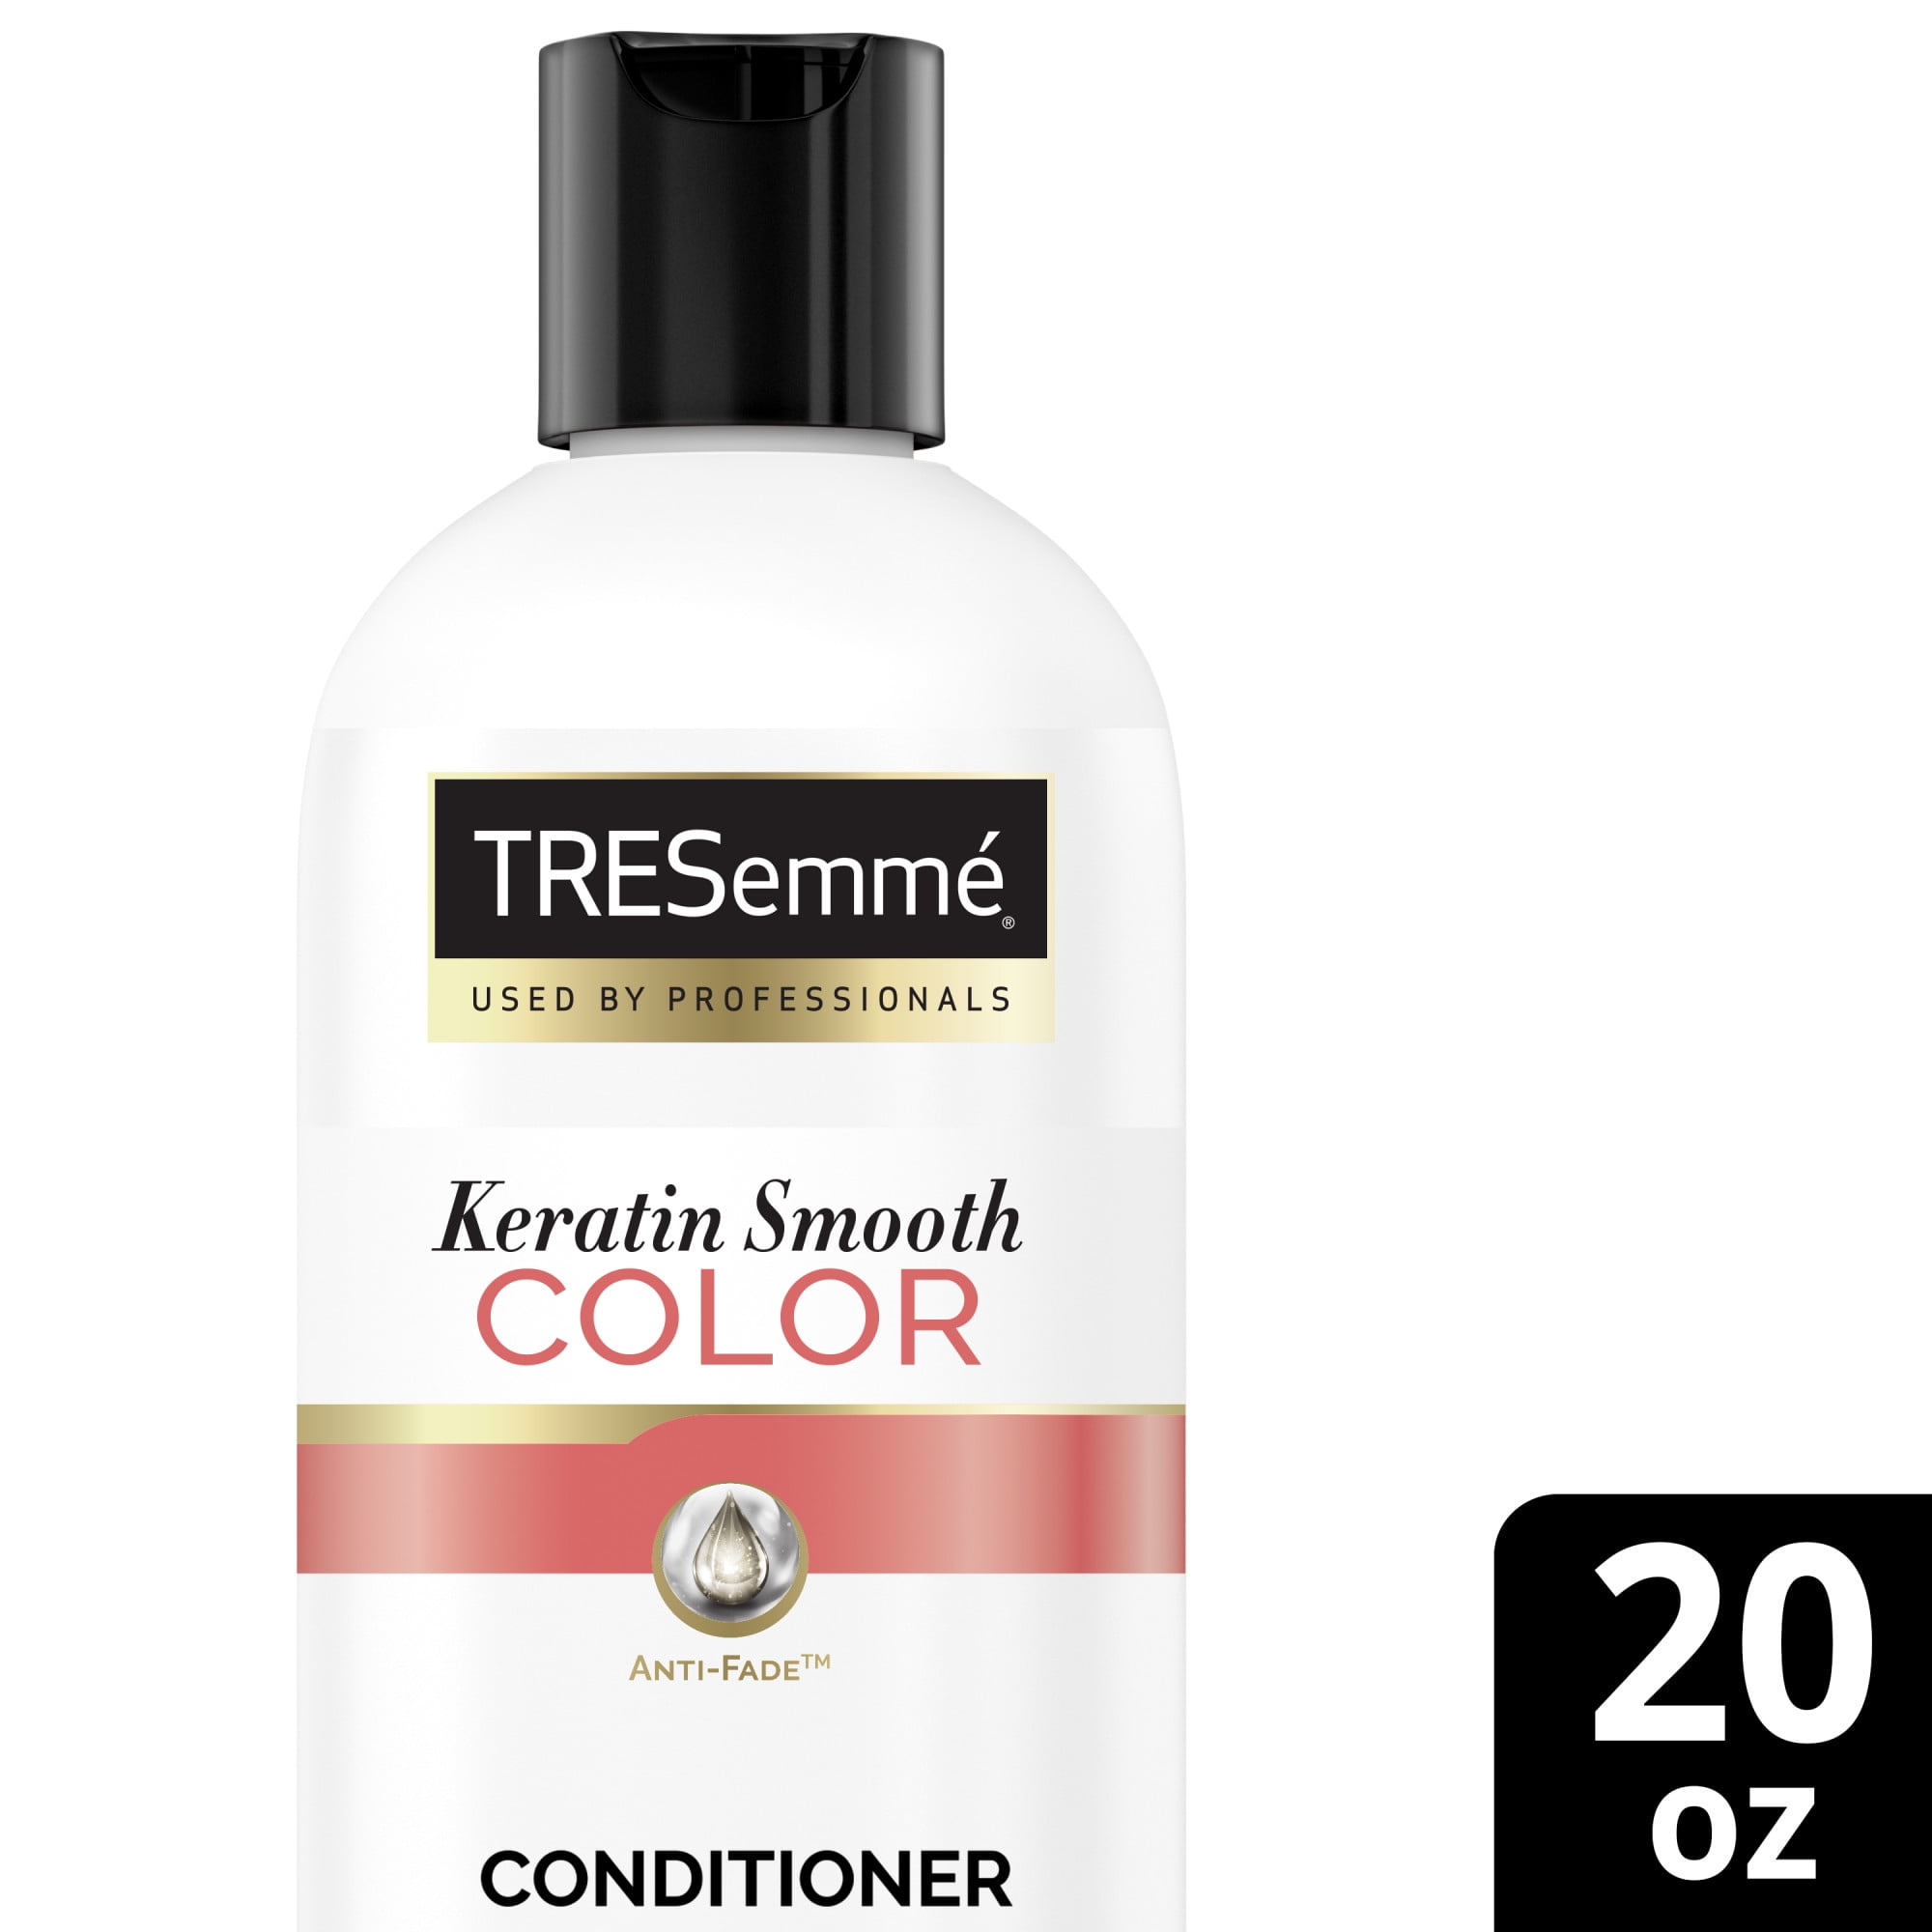 Tresemme Keratin Smooth Intense Color Lock and Gloss Conditioner 20 fl oz -  